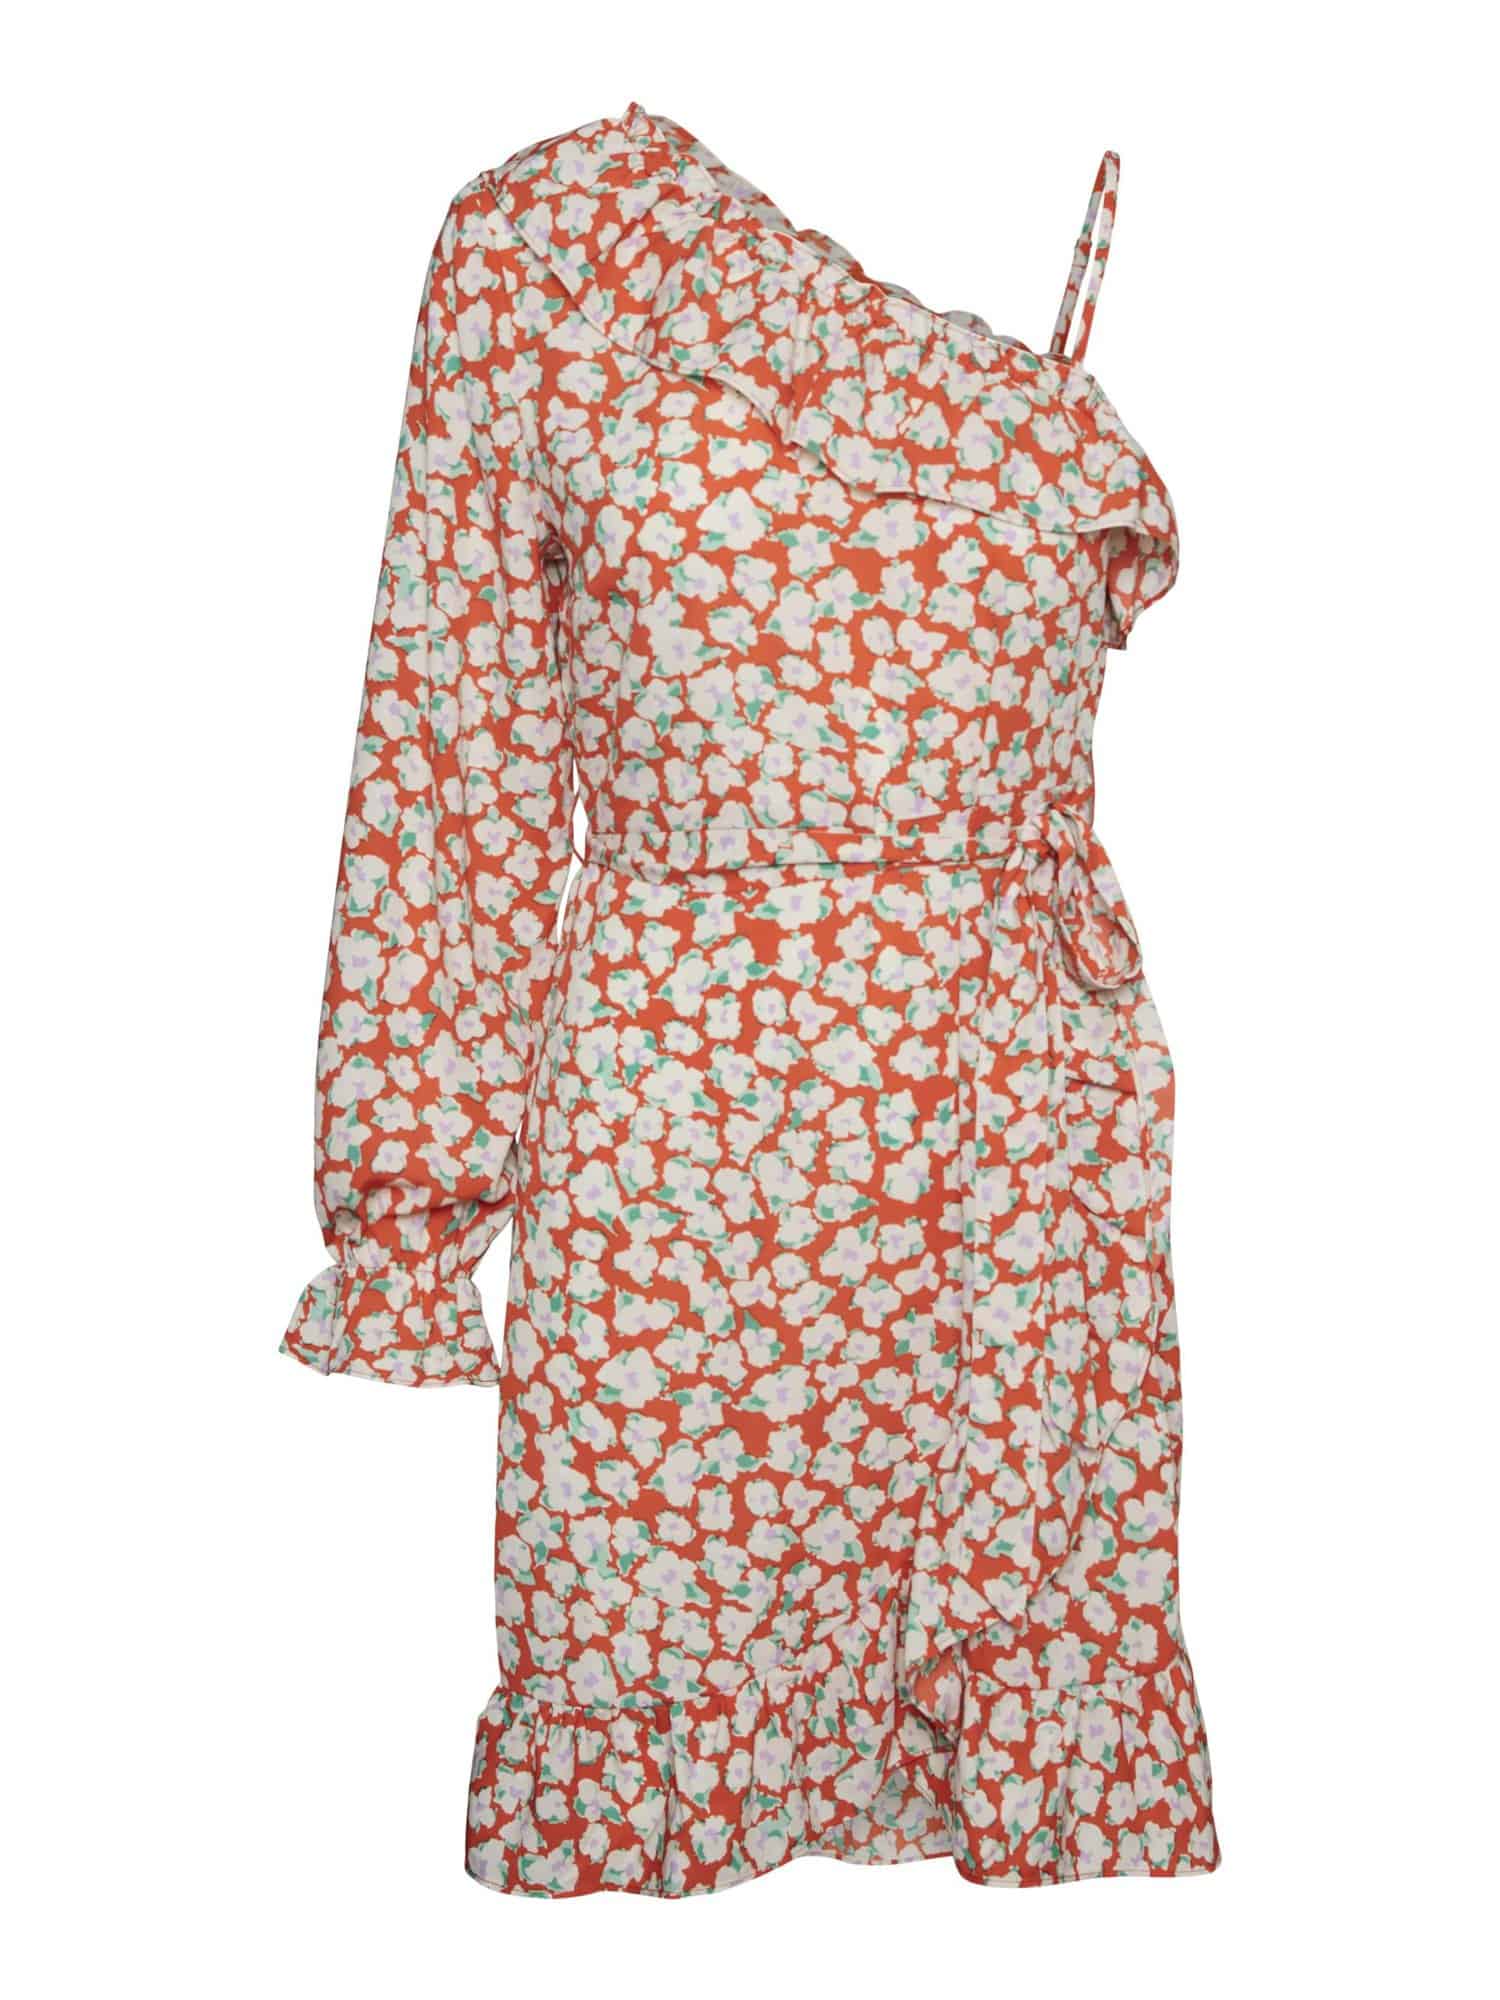 Editor's Pick: Vero Moda One-shoulder Floral Dress - Daily Front Row